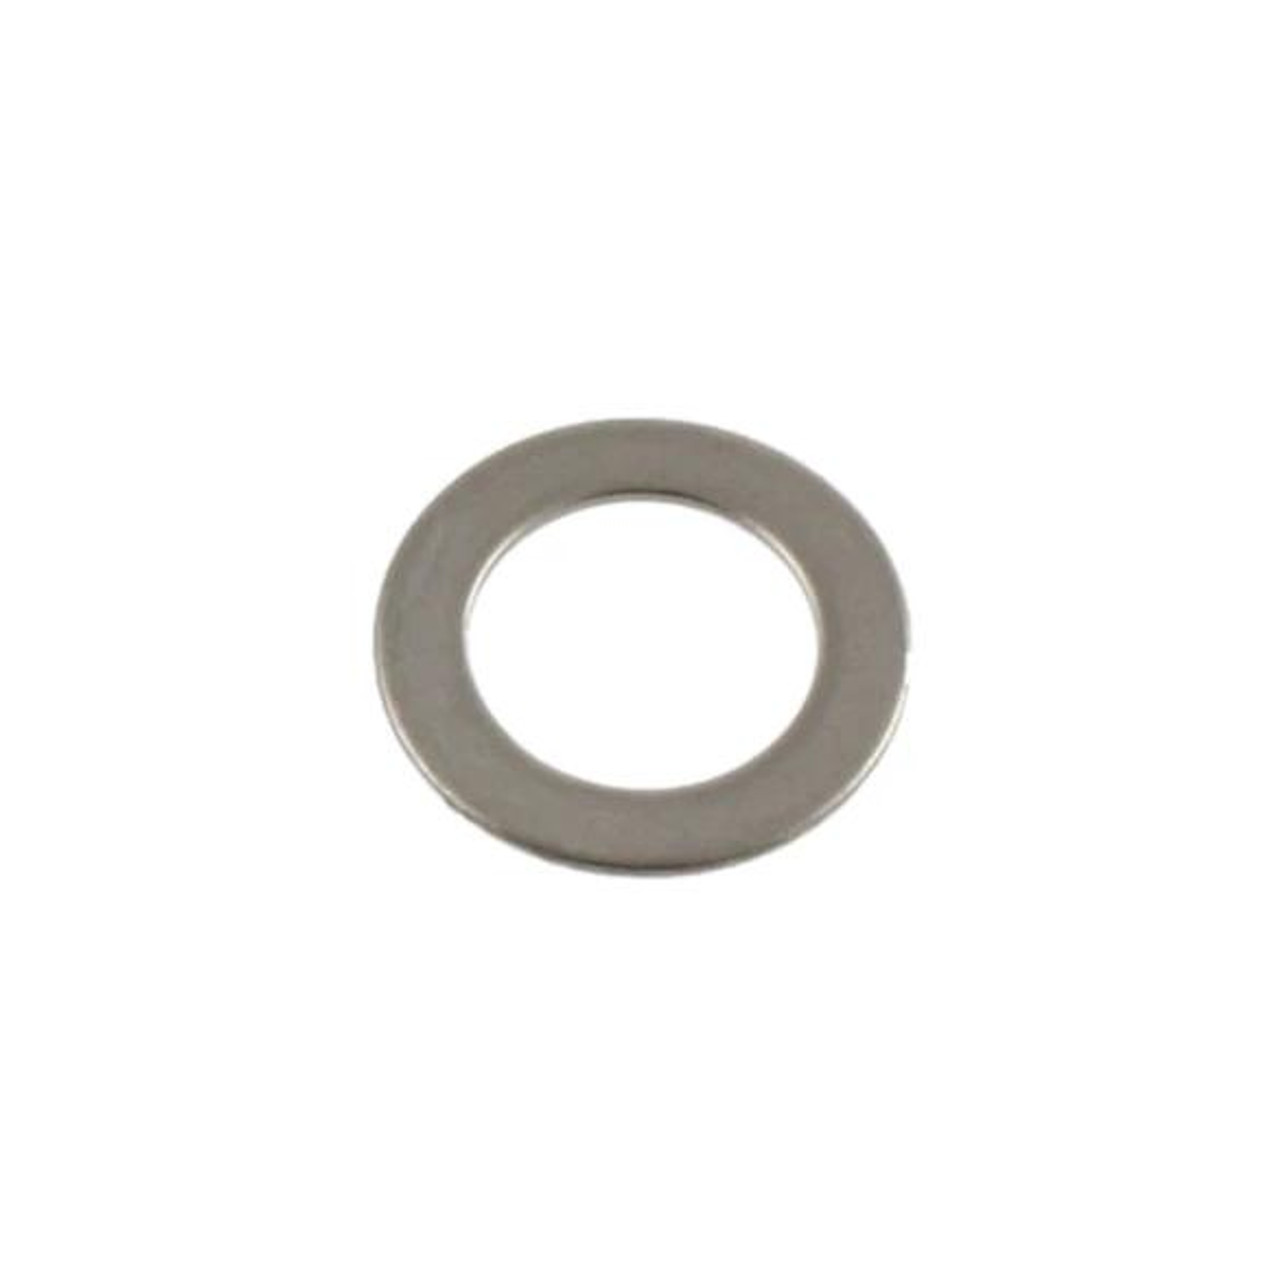 Washers for Pots and Input Jacks Pack of 25 Chrome